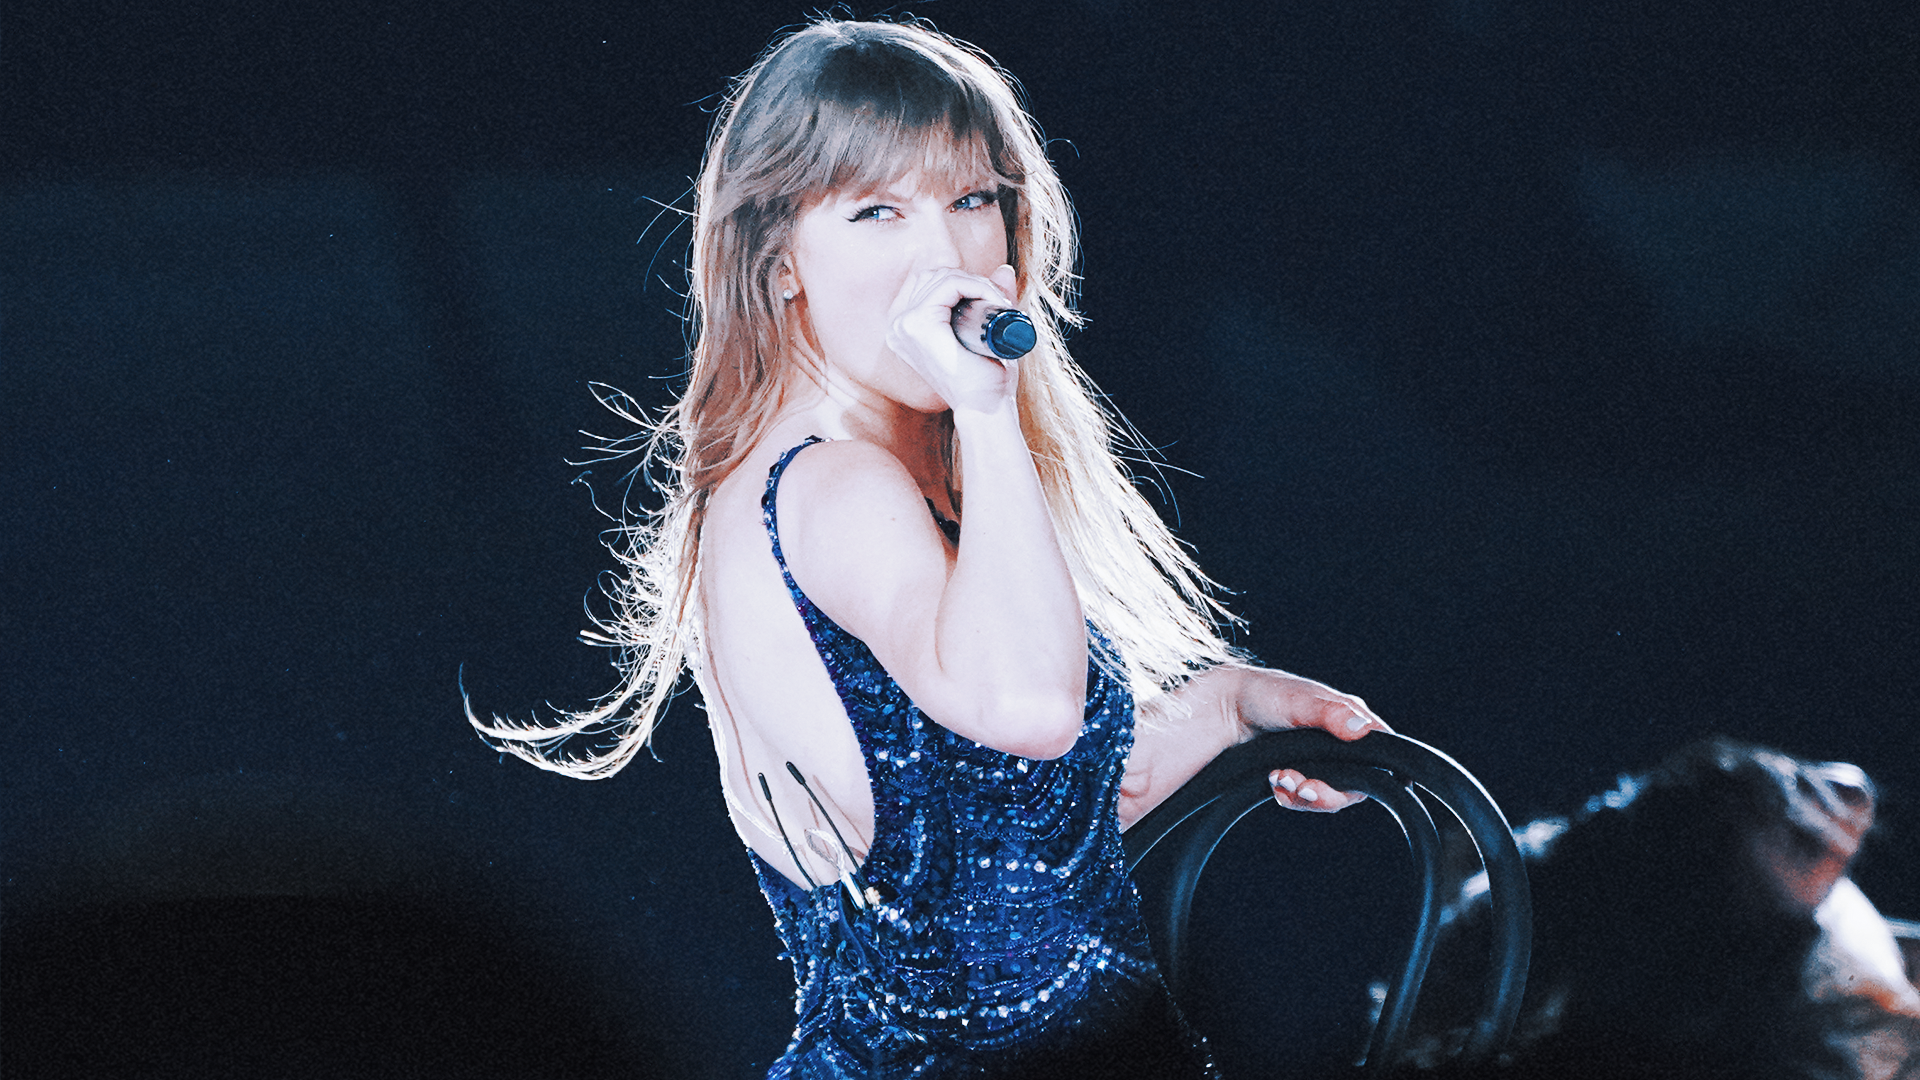 Taylor Swift expected to make epic journey from Tokyo to Super Bowl. Will she make it in time?